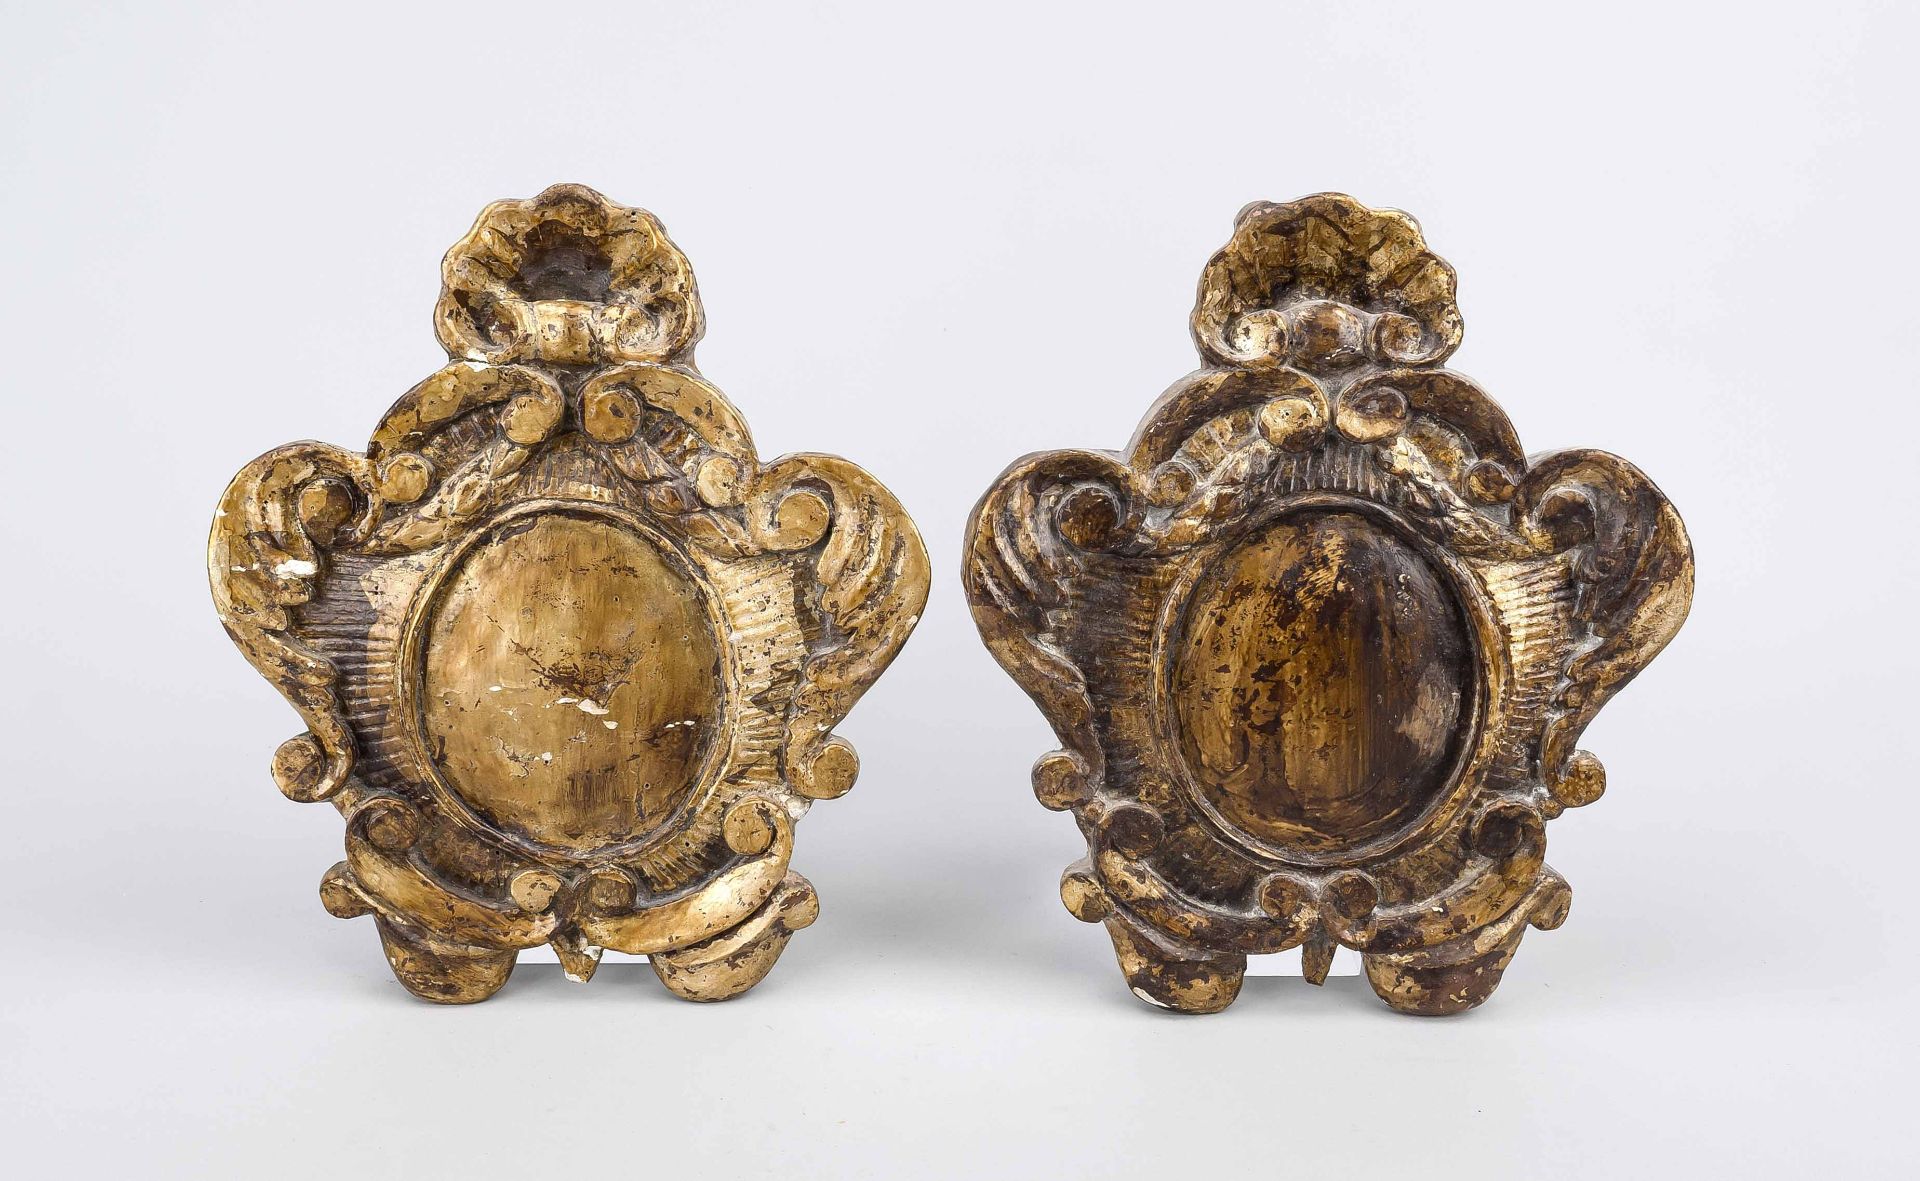 Pair of canon panels, probably 19th century, carved and gilded wood, h. 27 cm